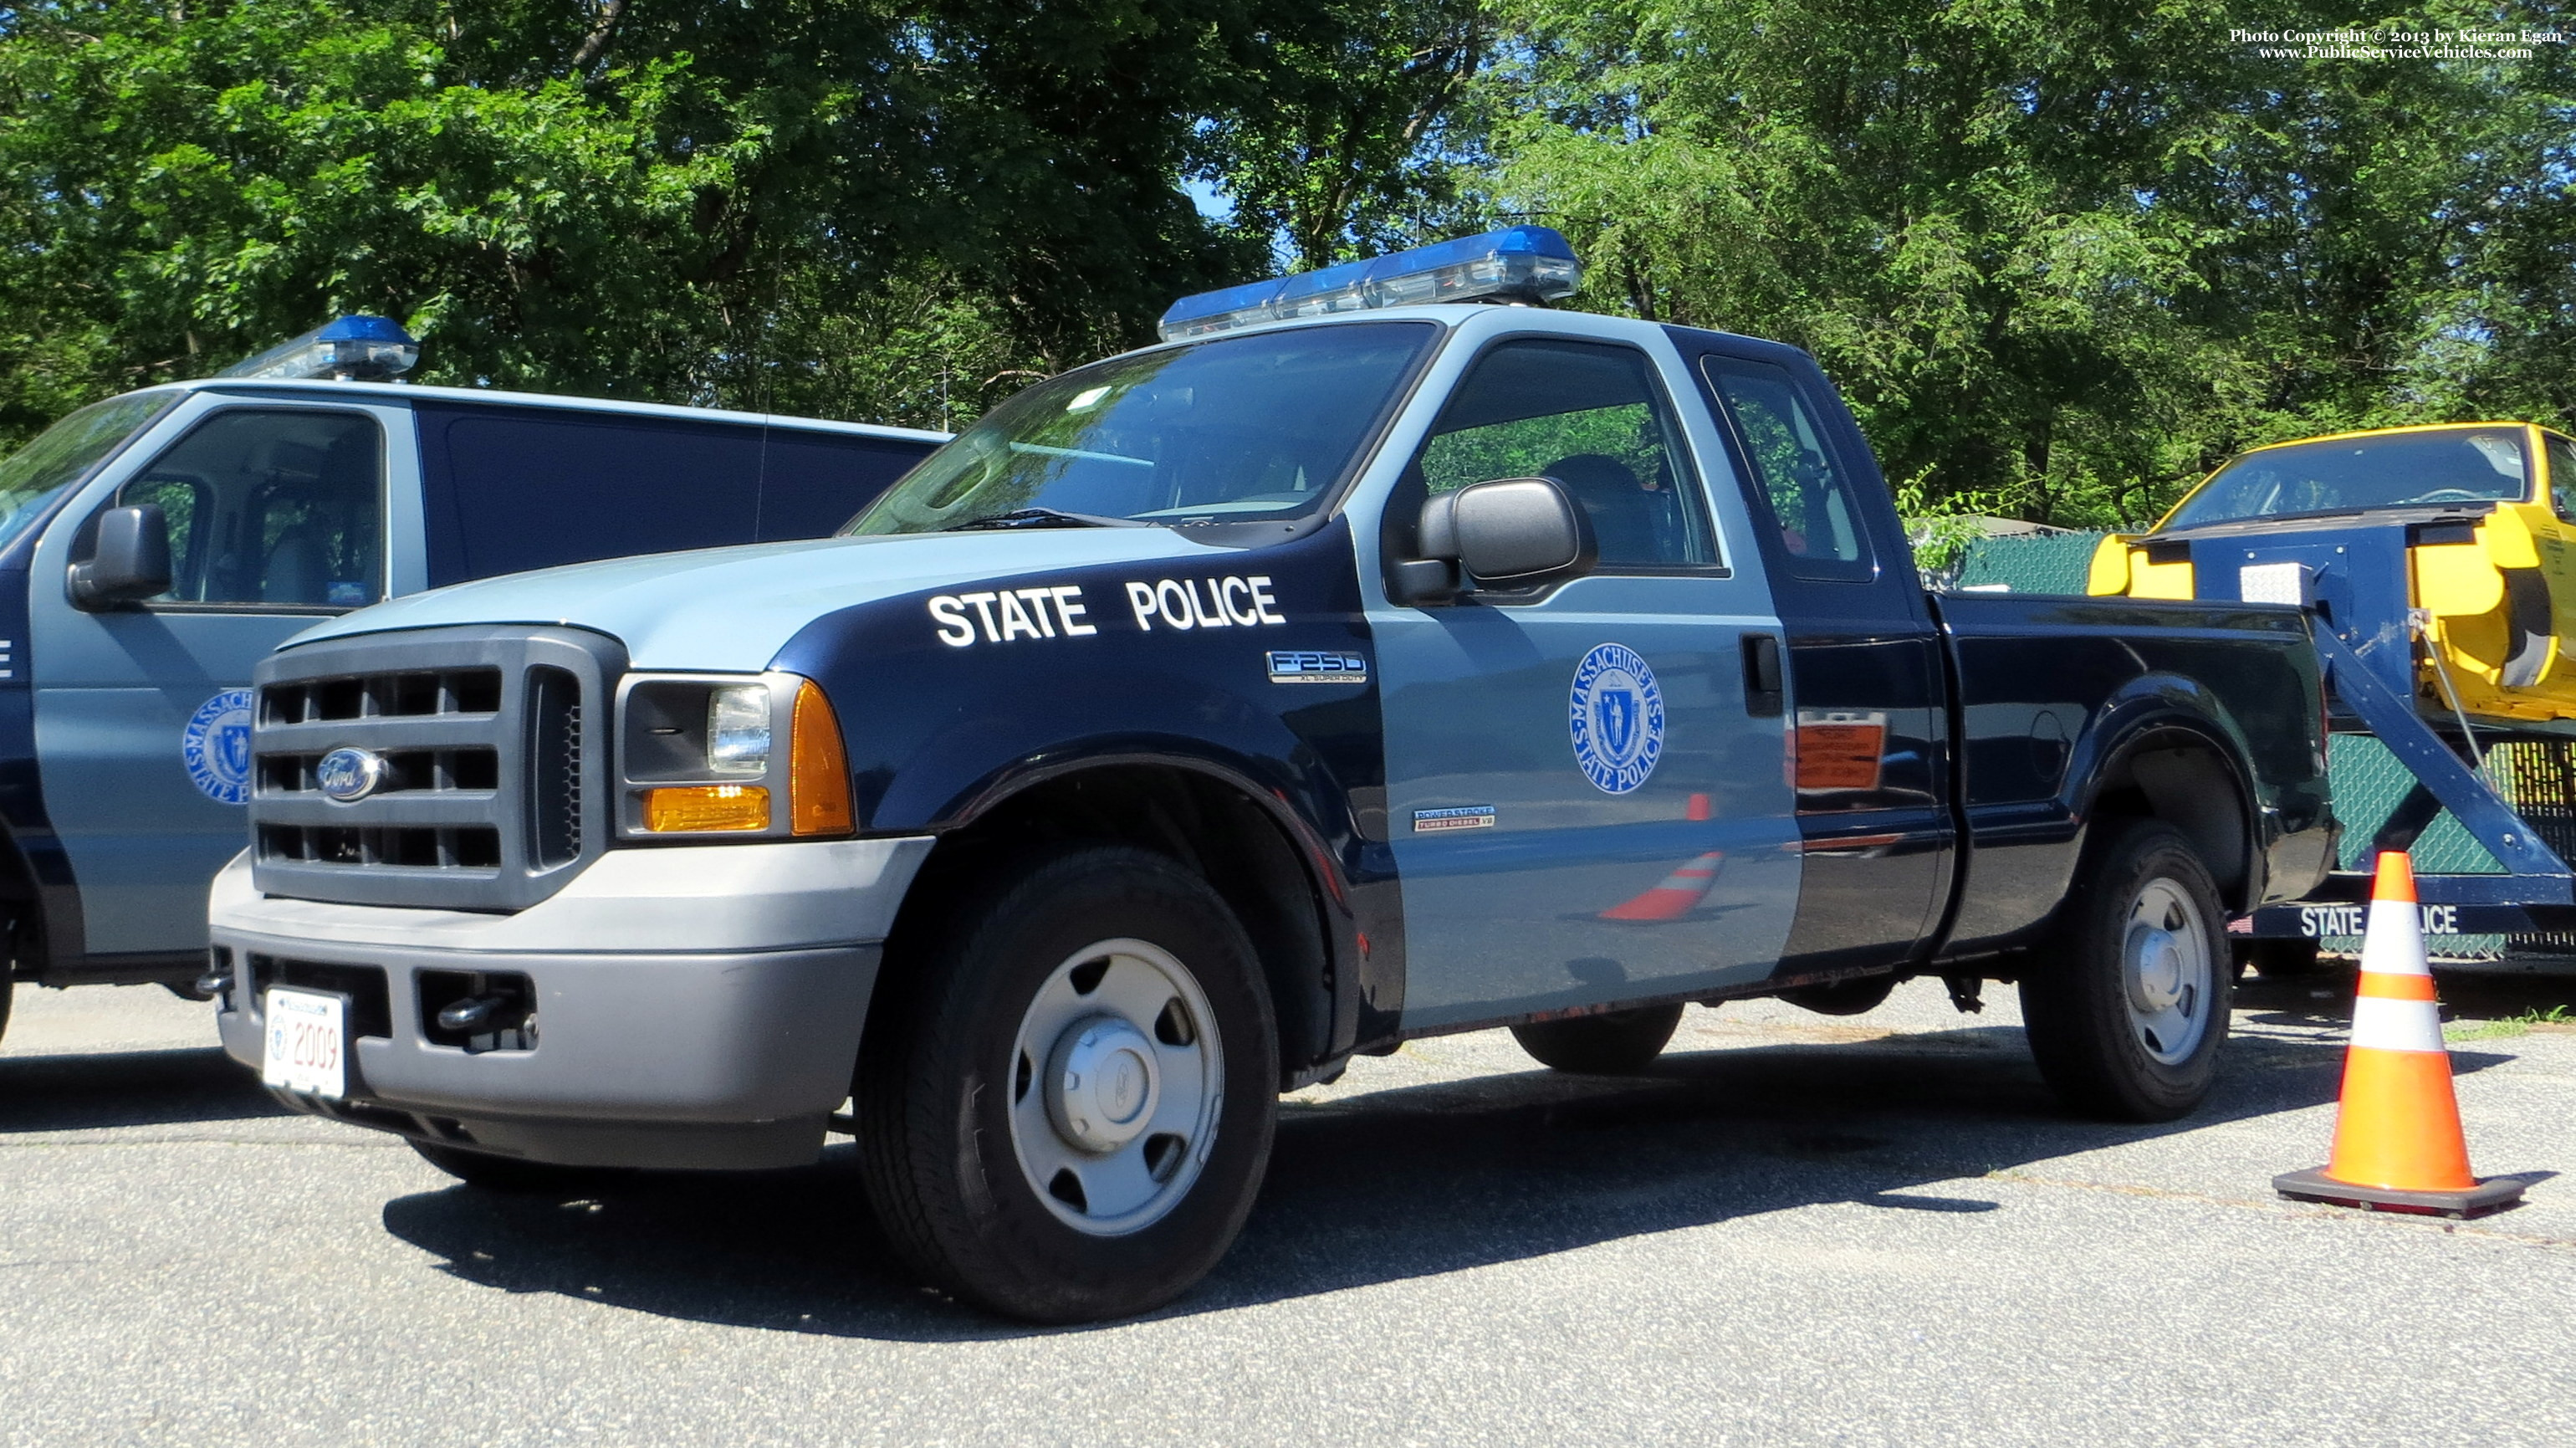 A photo  of Massachusetts State Police
            Truck 2009, a 2005-2007 Ford F-250             taken by Kieran Egan